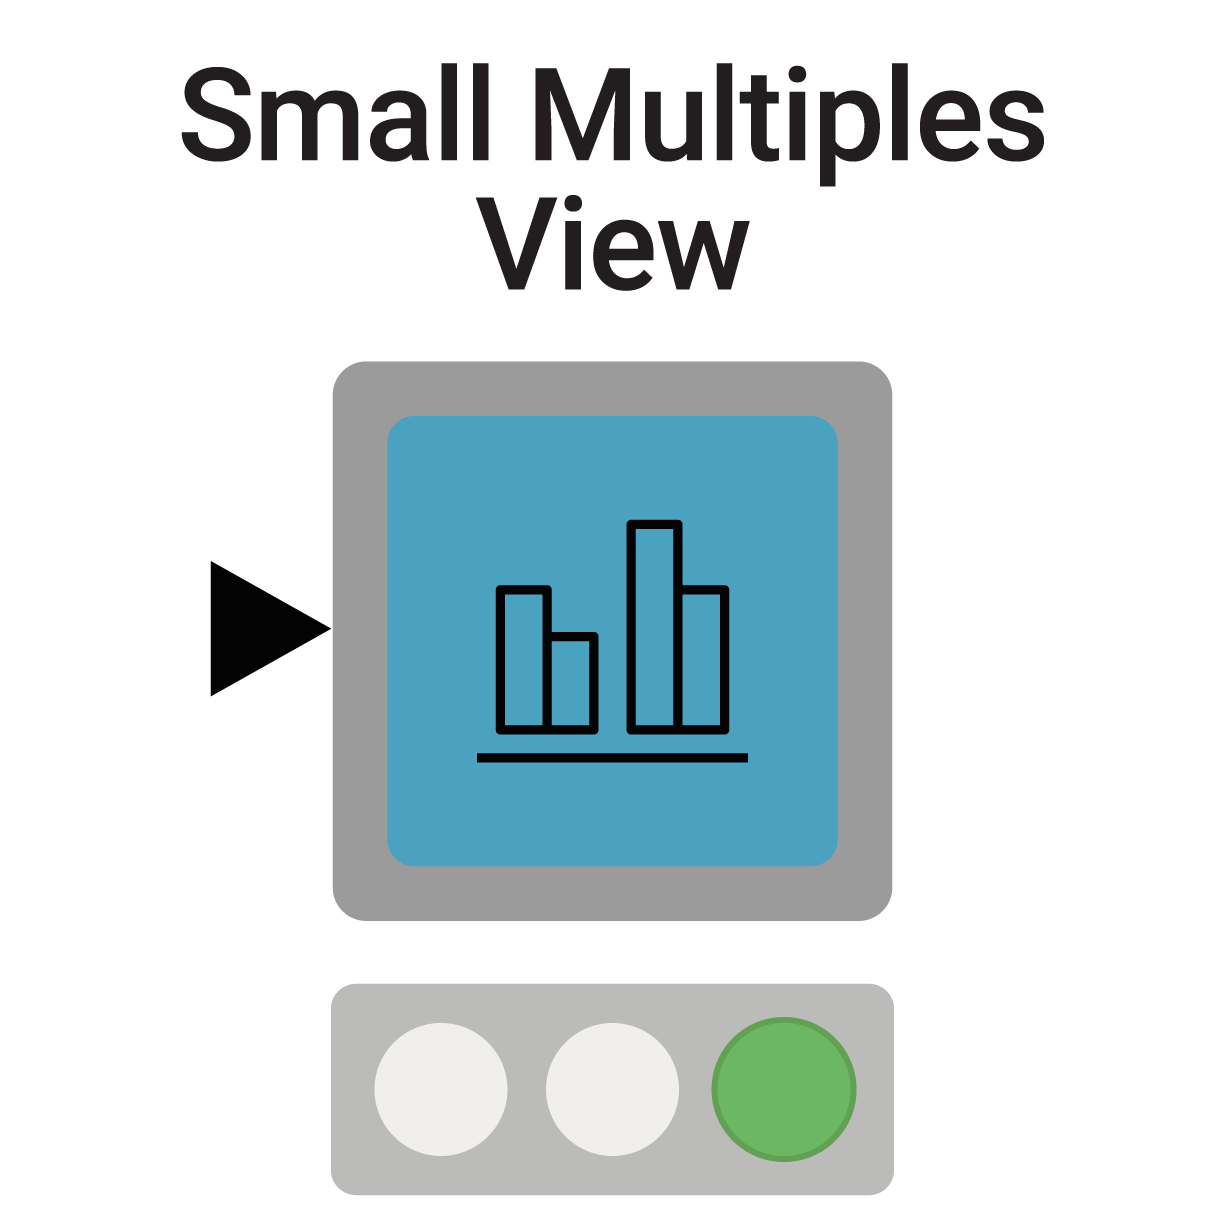 Small Multiples View